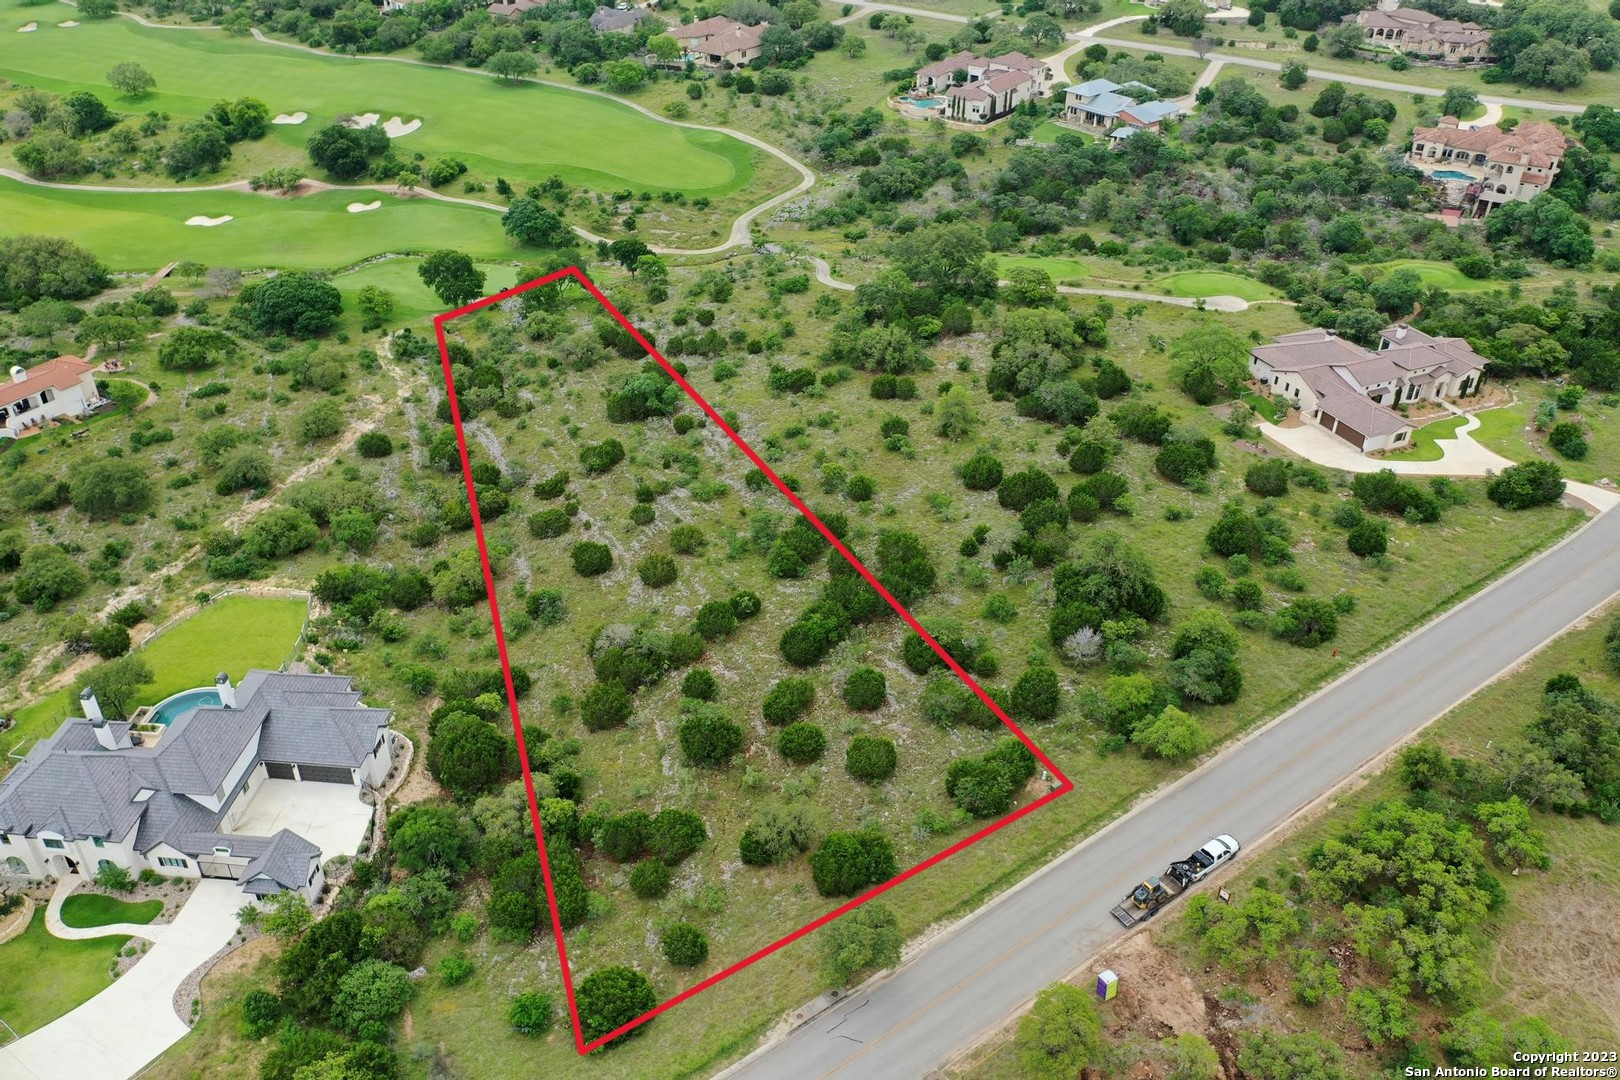 Photo of Lot 20 Clubs Dr in Boerne, TX